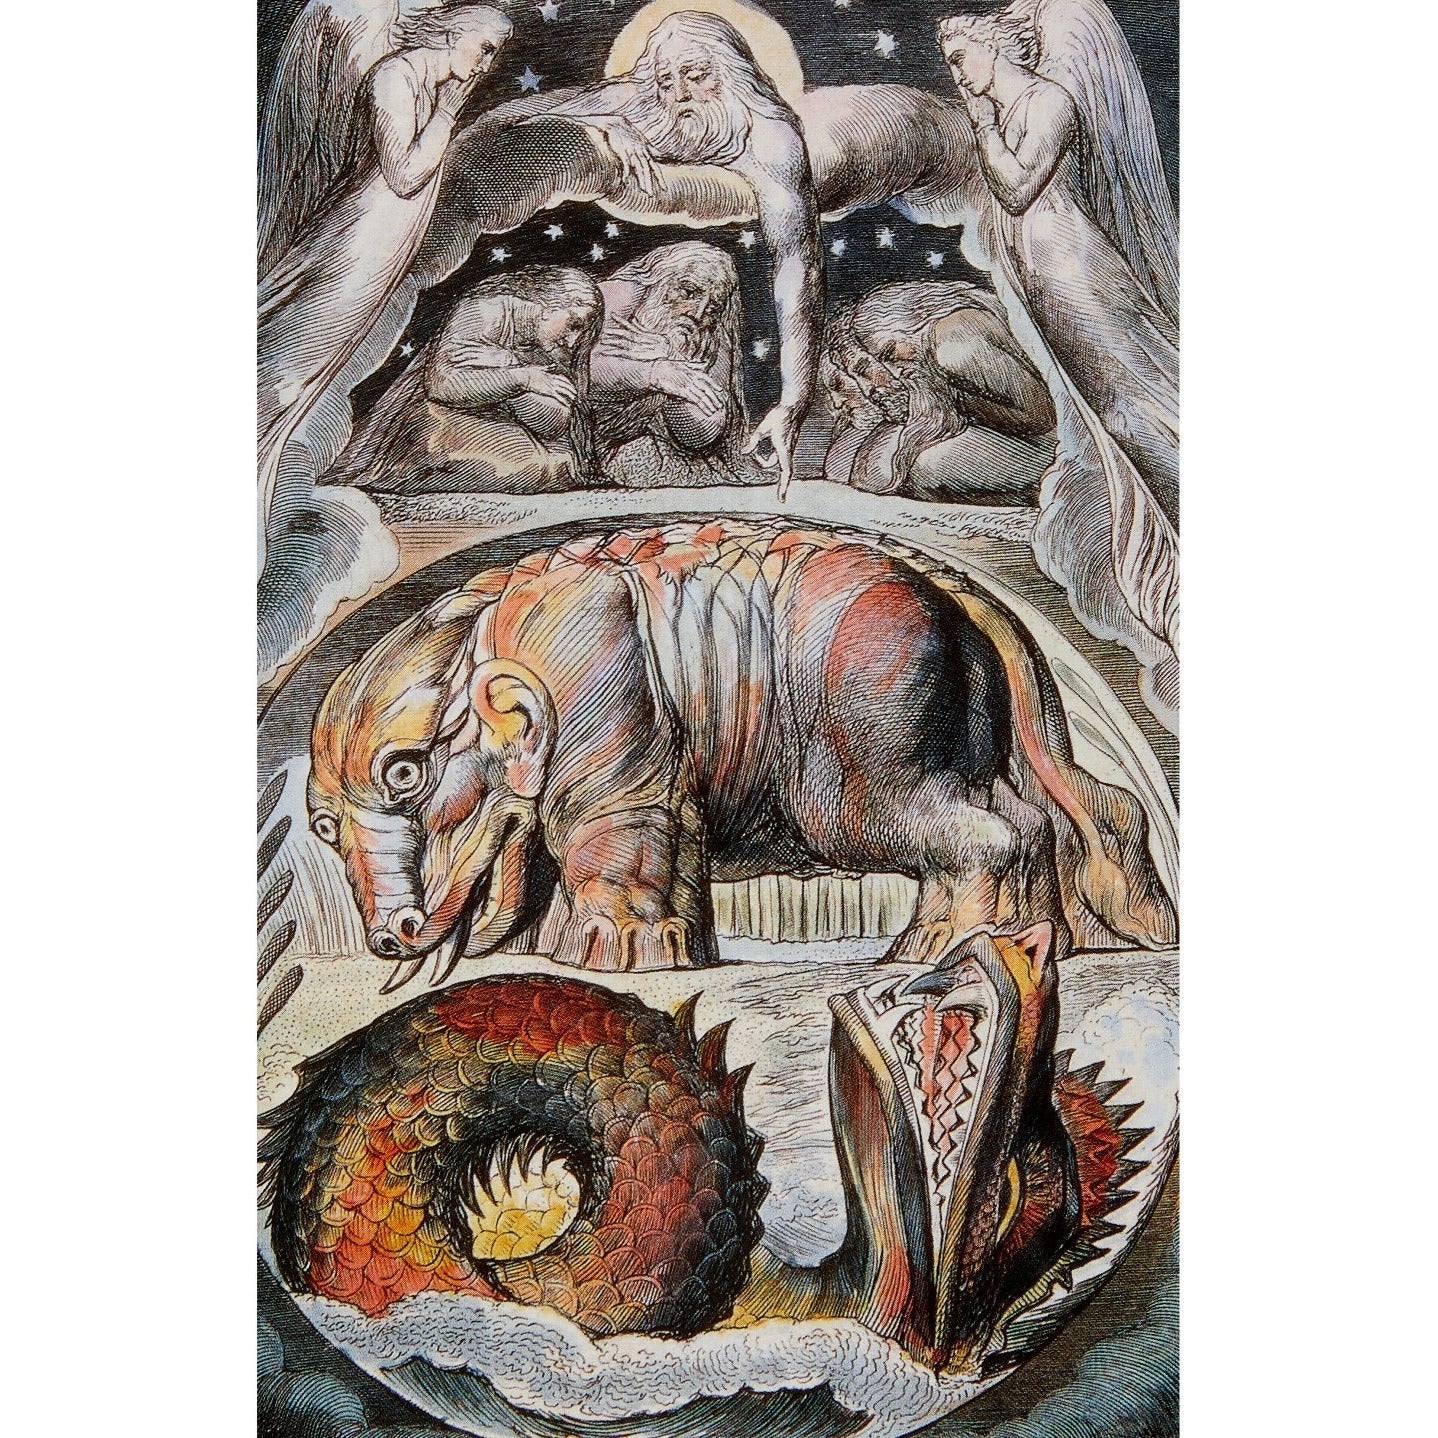 Notecard - Behemoth and Leviathan from Illustrations for the Book of Job, by William Blake. From the Fitzwilliam Museum, brought to you by CuratingCambridge.co.uk